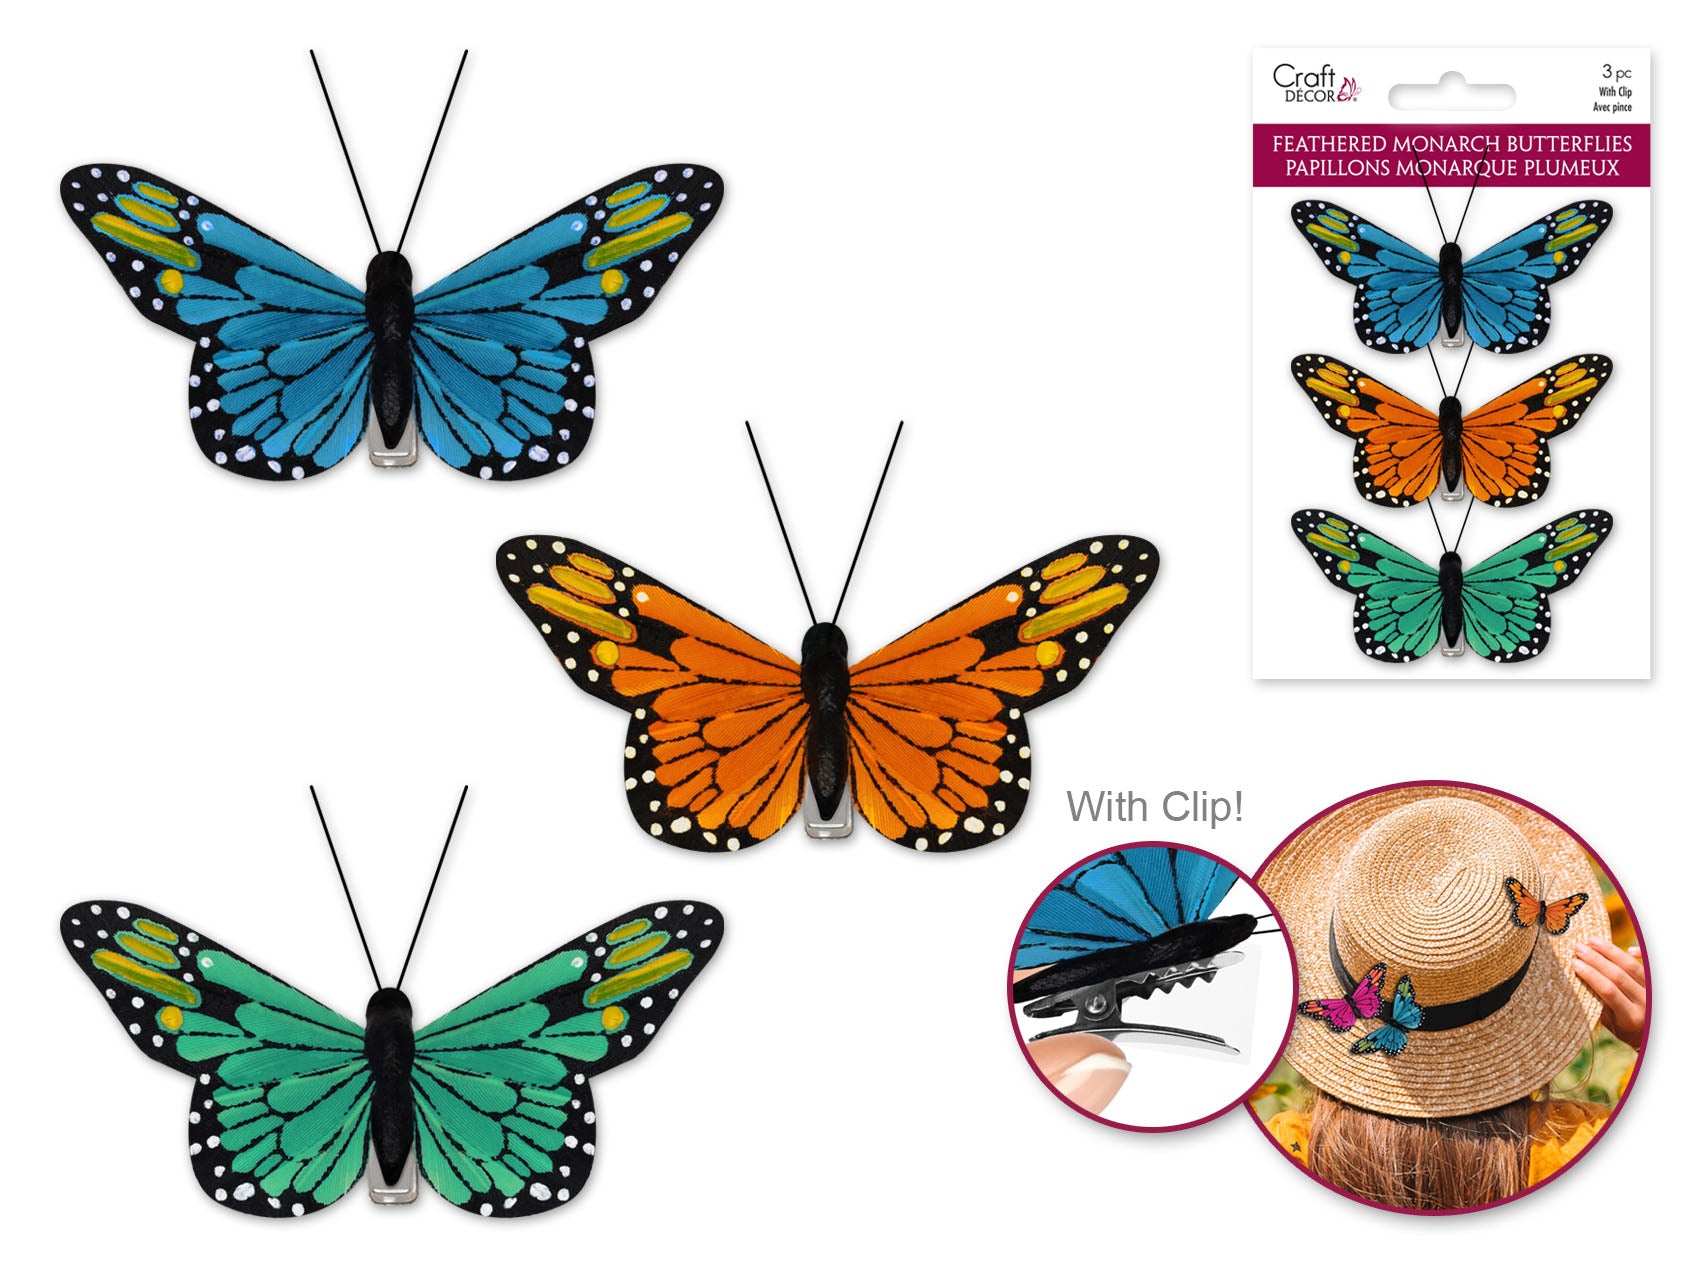 Craft Decor: 3.25"x1.75" Feathered Monarch Butterflies with Gator Clip B) Glam